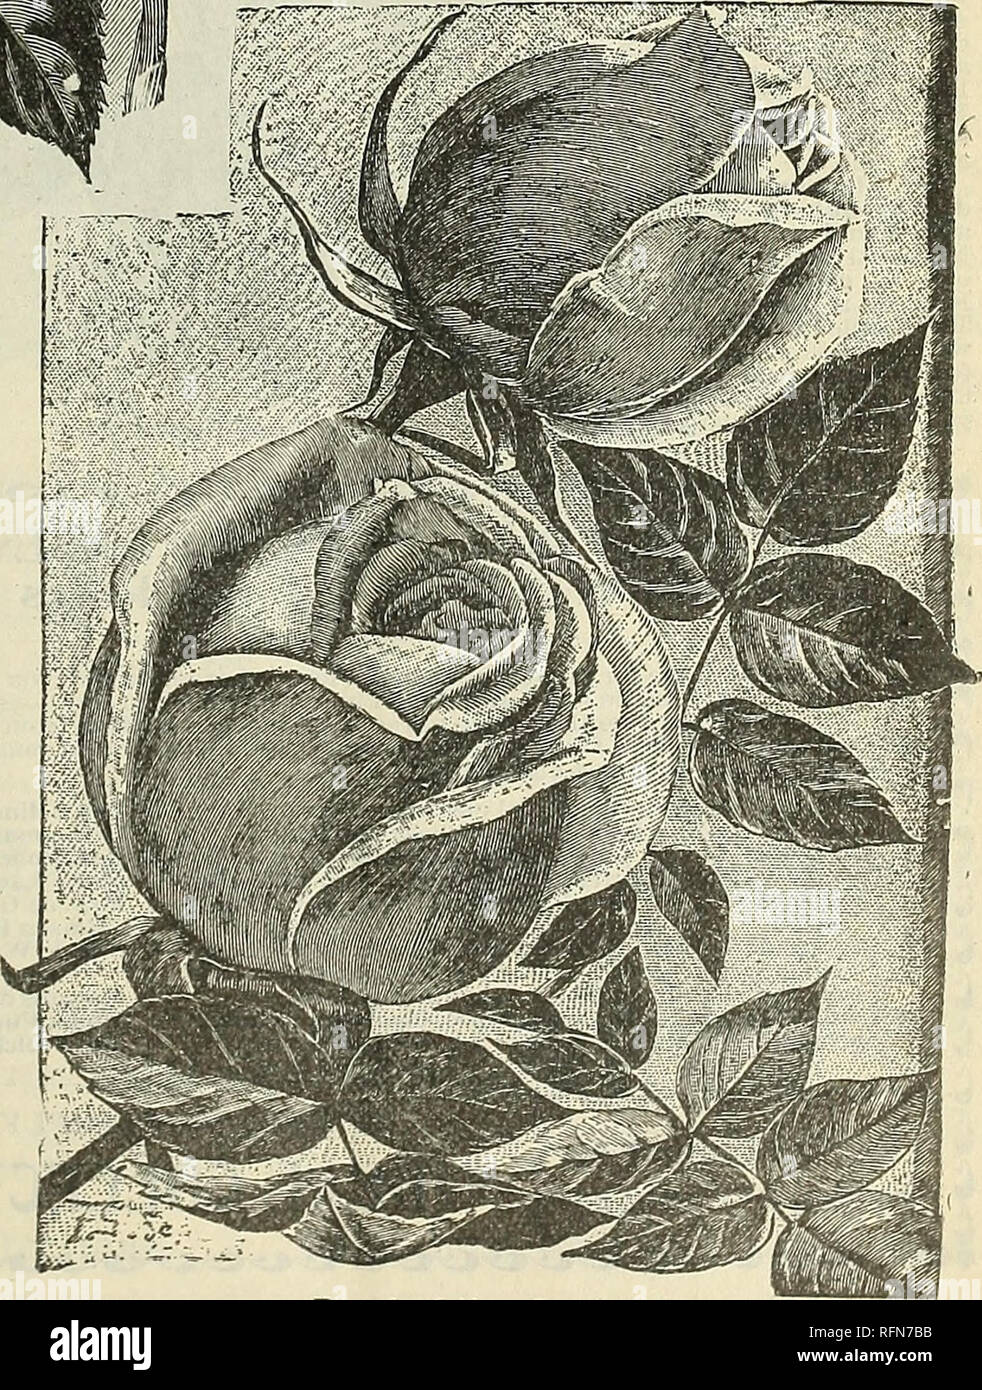 . Floral gems : 1897. Flowers Seeds Catalogs; Bulbs (Plants) Catalogs; Roses Catalogs; Plants, Ornamental Catalogs; Commercial catalogs Ohio Springfield. a The Charming New Tea Rose, LUCIOLE. A new French Tea Rose of much more than ordinary merit, very bright carmine Rose, tinted and shaded with saffron, the base of the petals being copper-yellow with reverse a rosy bronze; large, pointed, very double and very sweet-scented; flower stem roughened like a Moss Rose, the coloring is entirely new and very brilliant. The open red Rose reminds one of a ripe red peach. Certainly no Rose equals this i Stock Photo